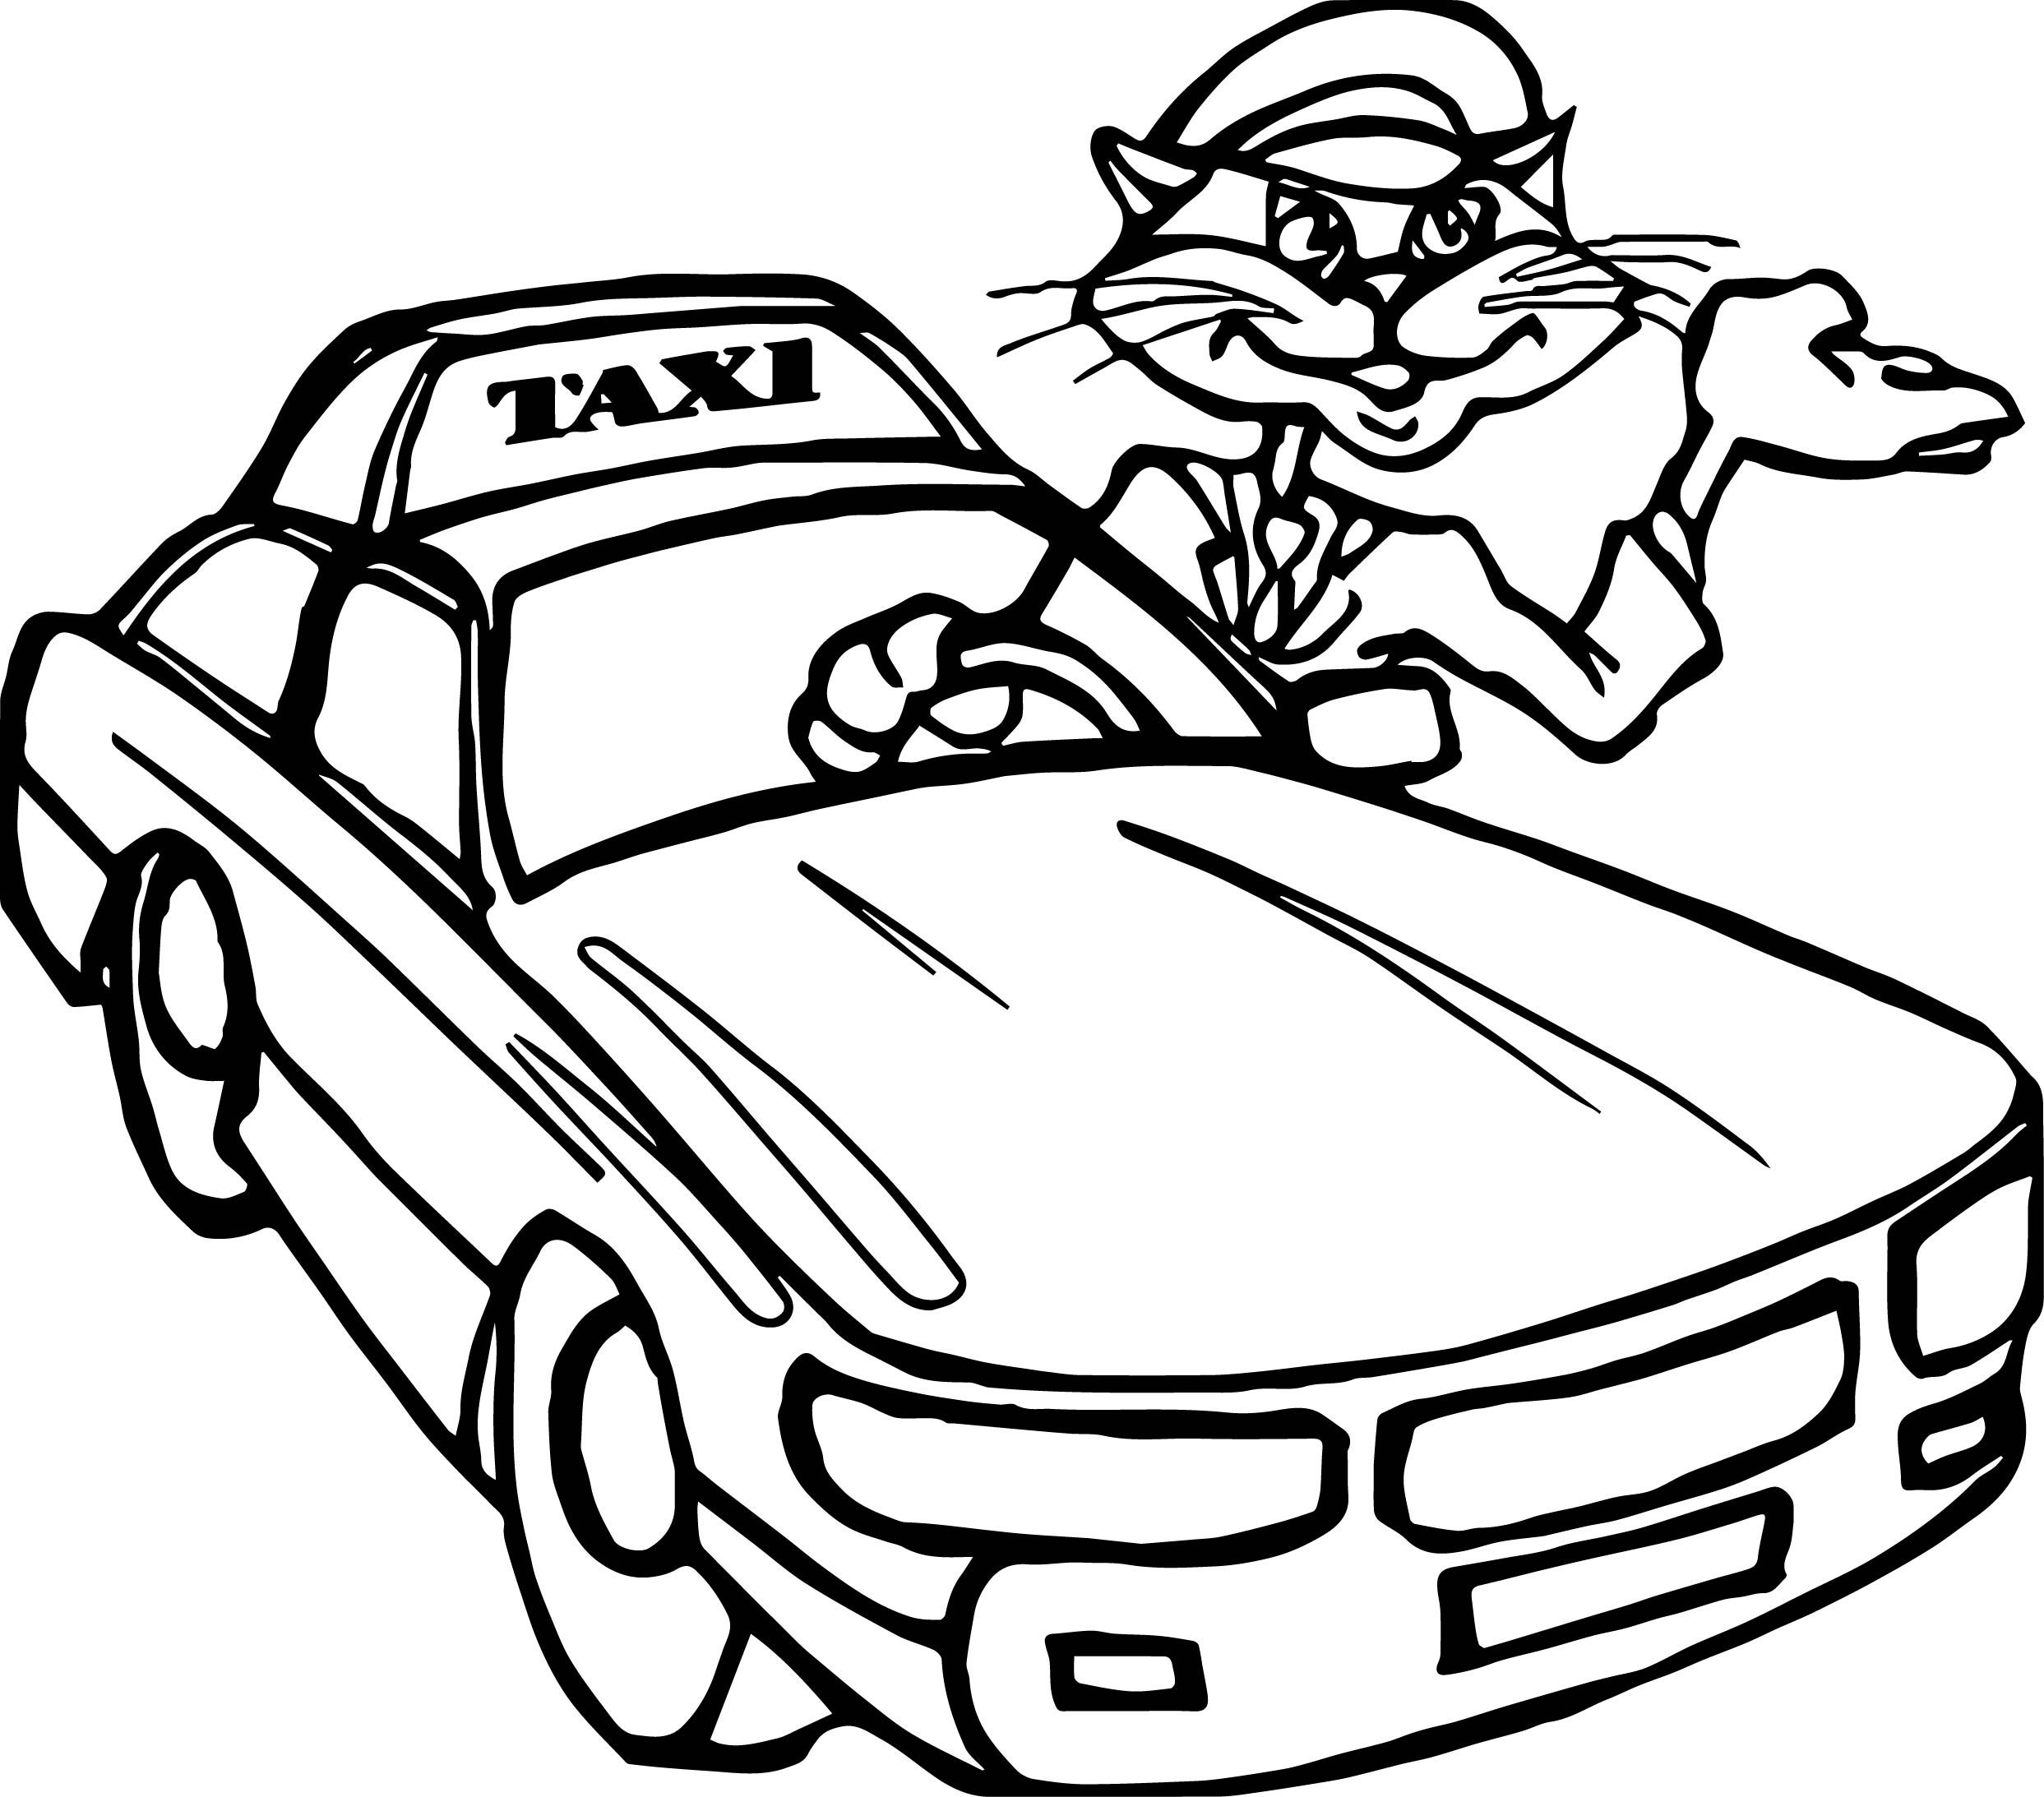 Download Taxi Coloring Pages Coloring Home